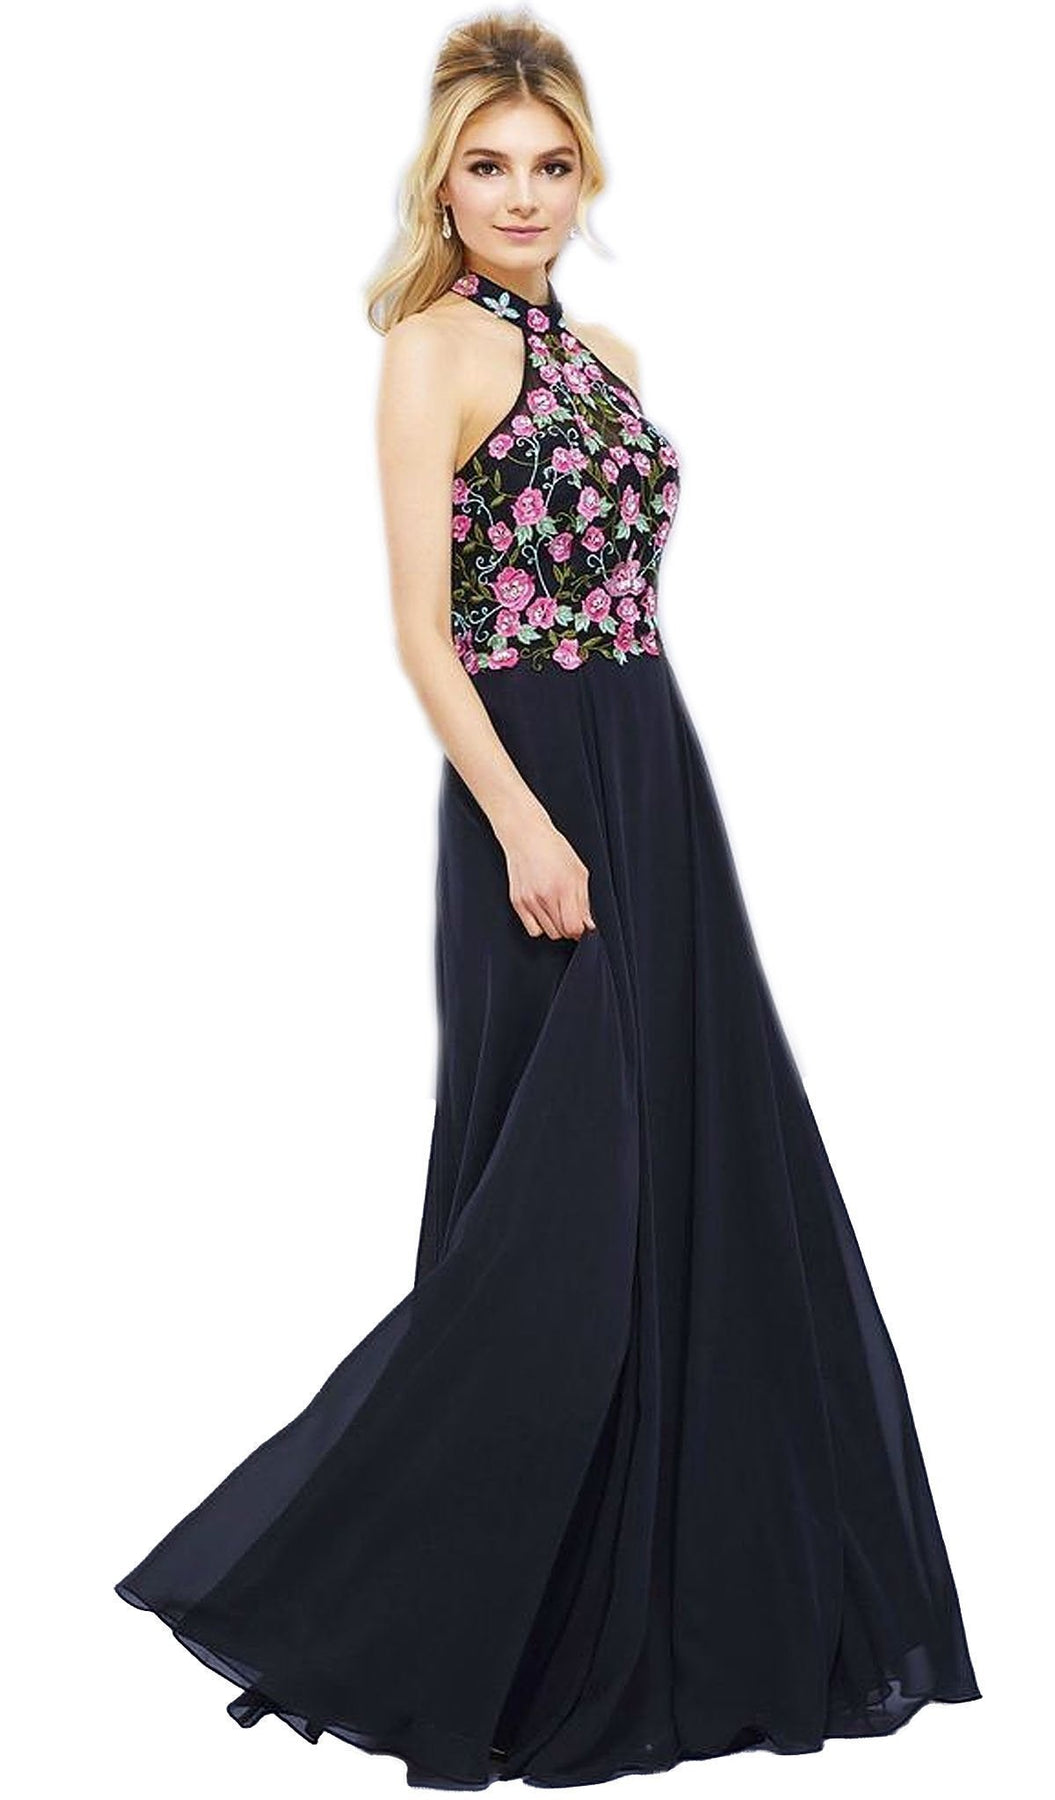 Nox Anabel - 8326 Lovely Floral Halter Style Long Evening Gown Special Occasion Dress XS / Black